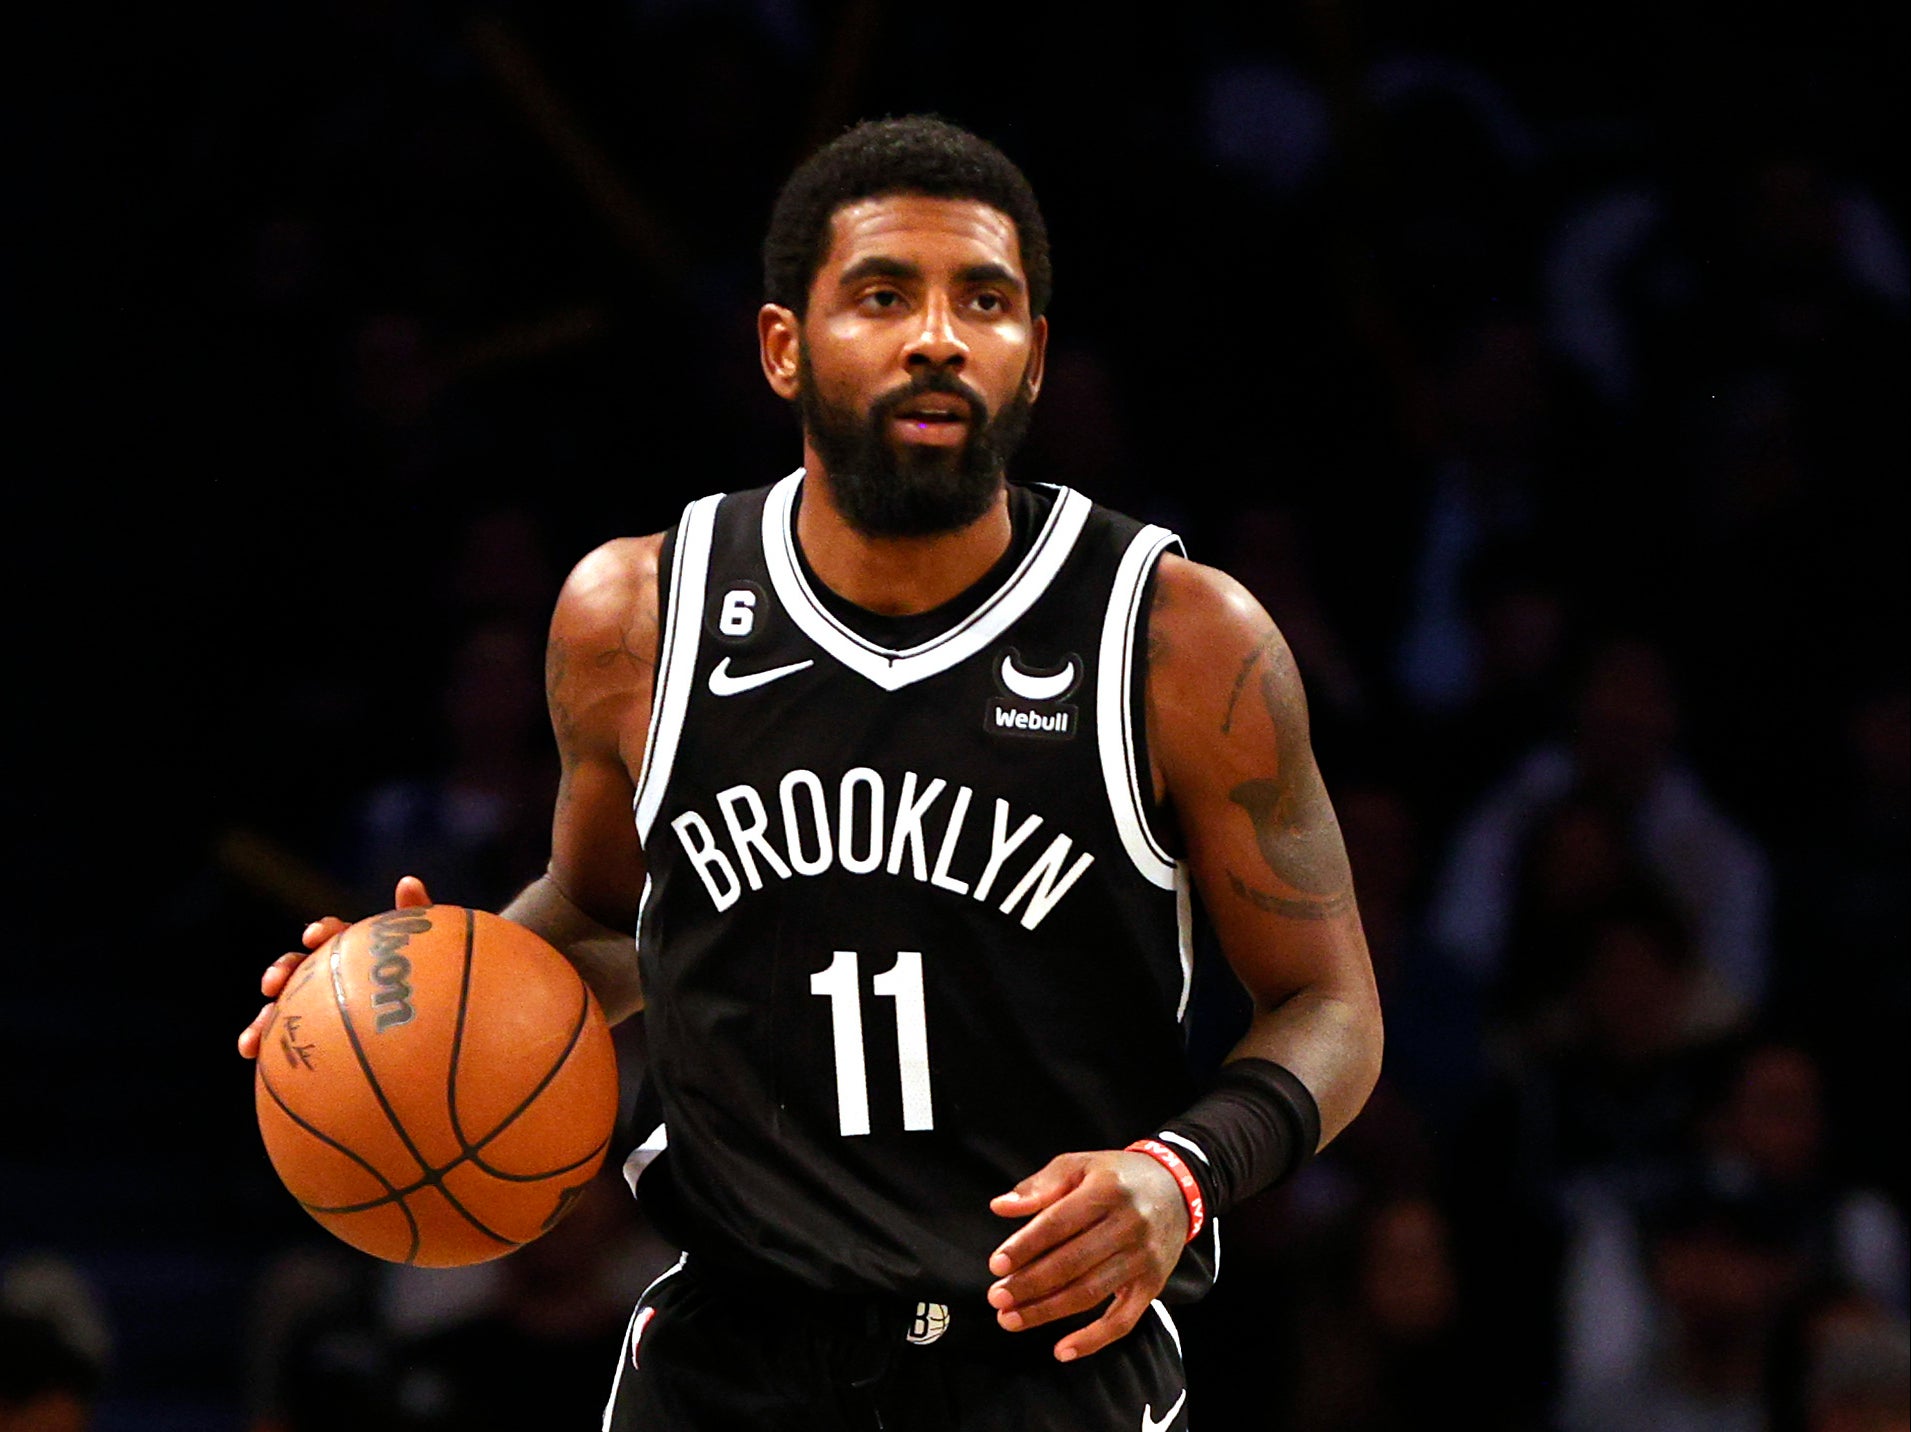 Kyrie Irving finally issued an apology for promoting an antisemitic documentary